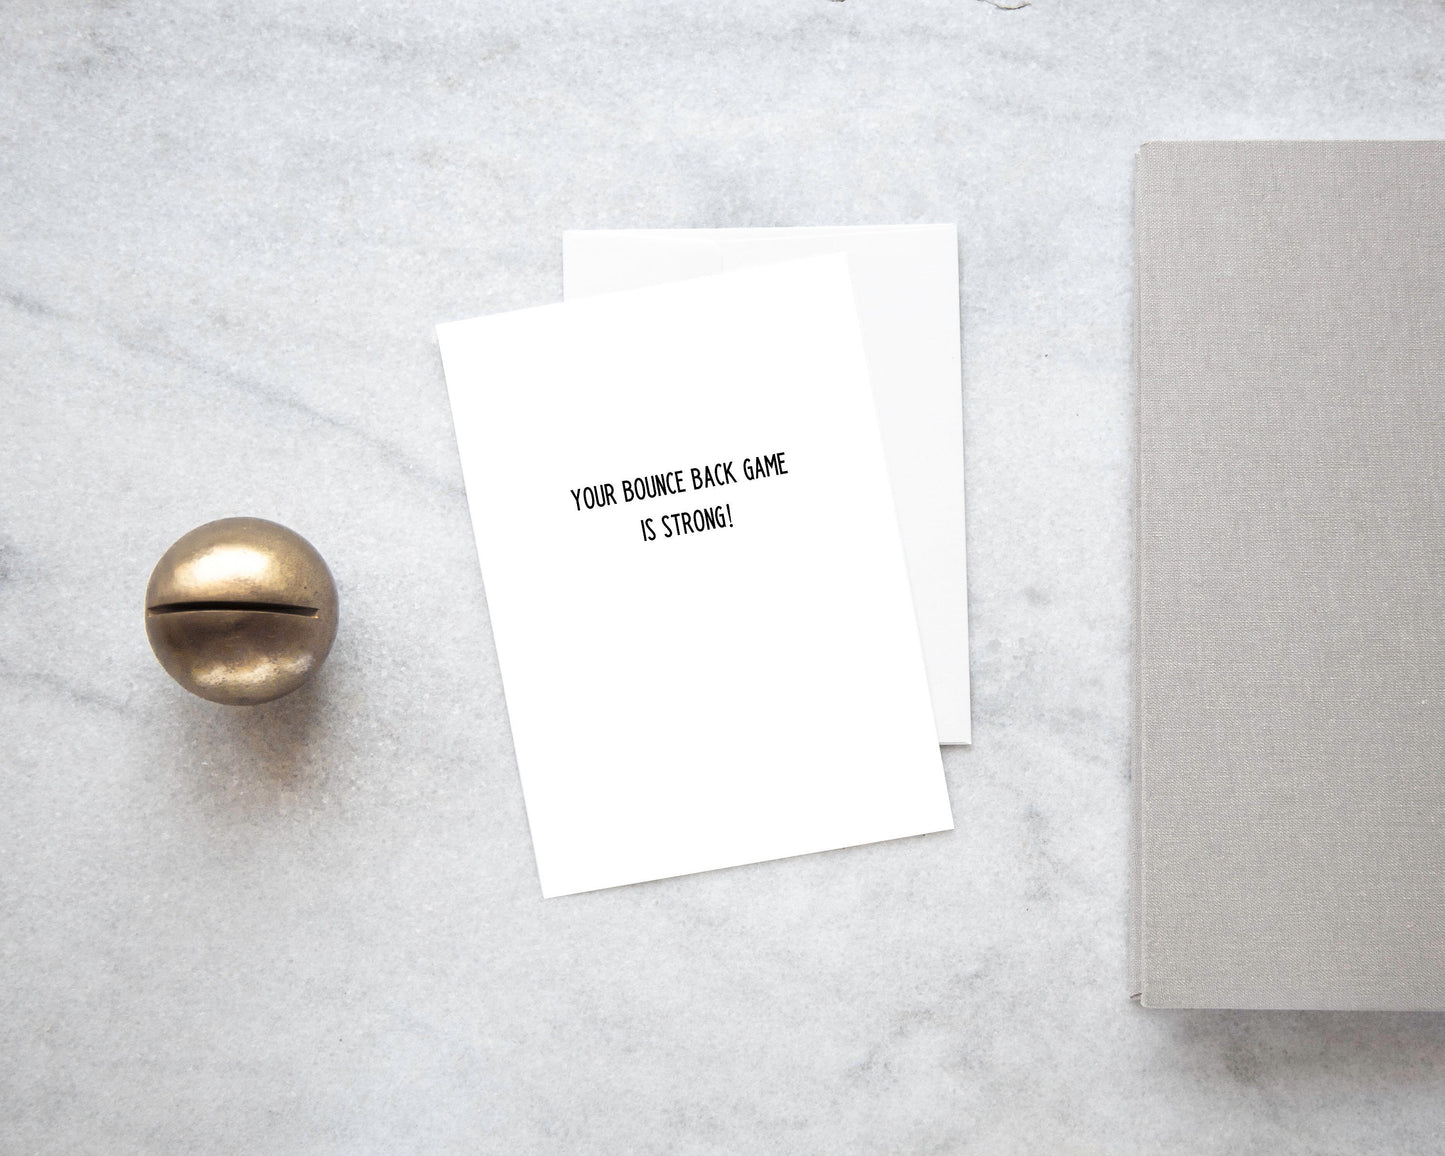 Your bounce back game is strong,Get well soon card,Encouraging card,Breakup card,Card for friend,Card for athlete,Just because card,Inspire